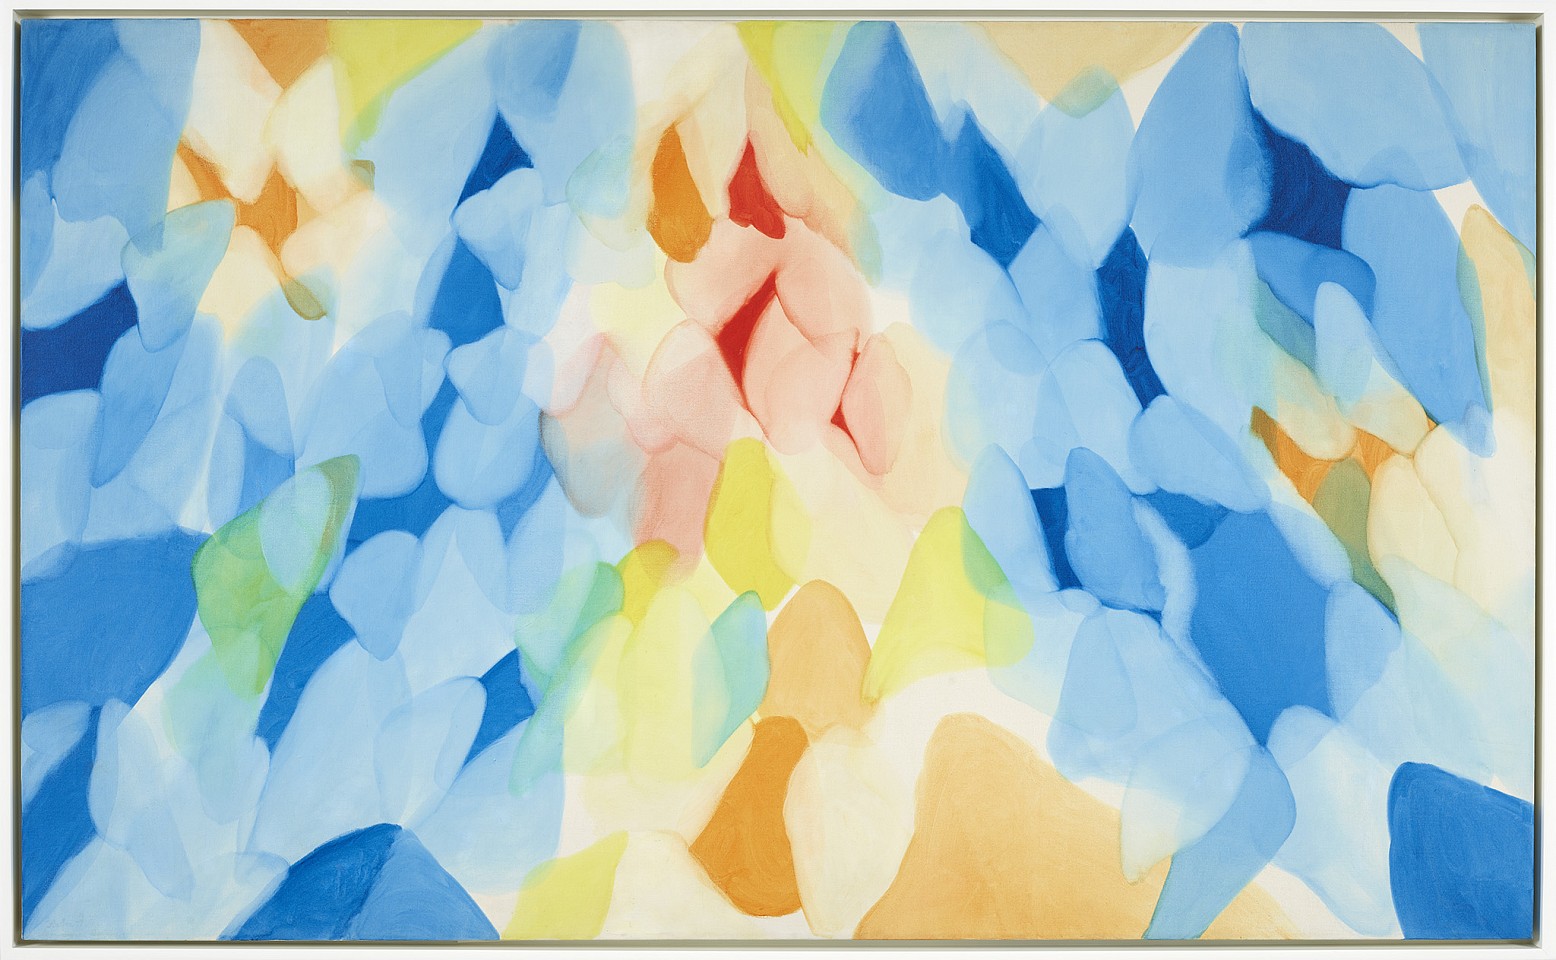 Alice Baber, The Blue Drum Path to the Open Coast, 1977
Oil on canvas, 40 x 66 in. (101.6 x 167.6 cm)
BAB-00028